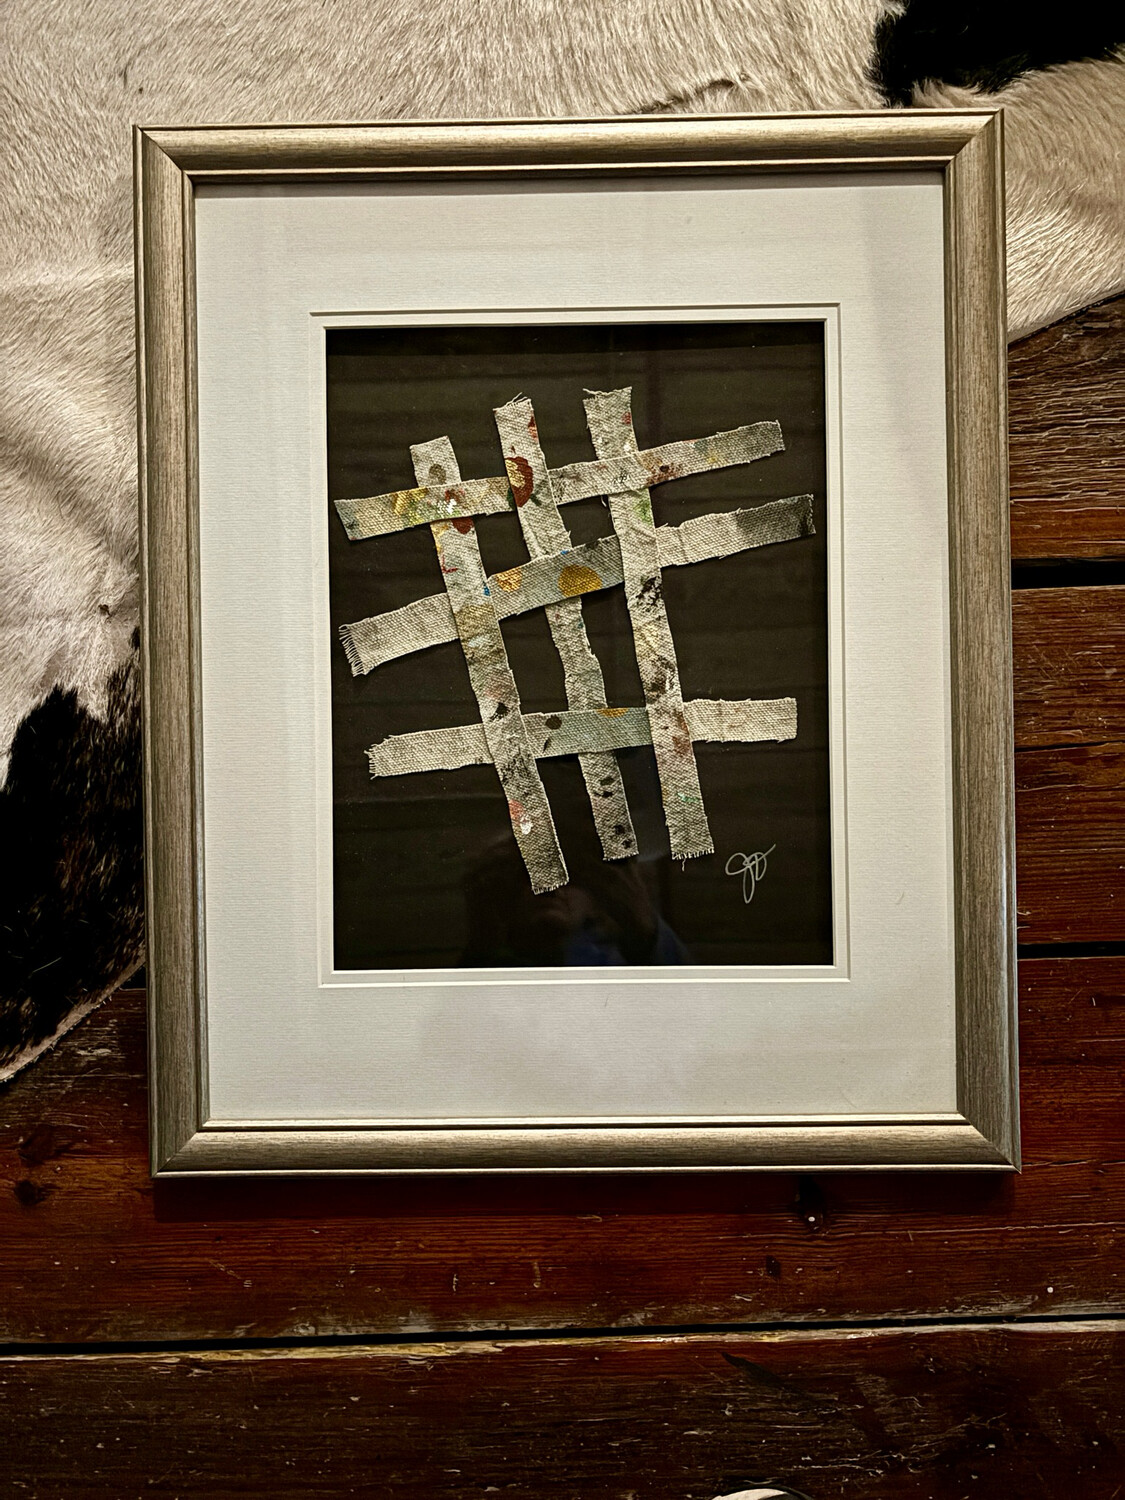 Intersections (16x20) Framed